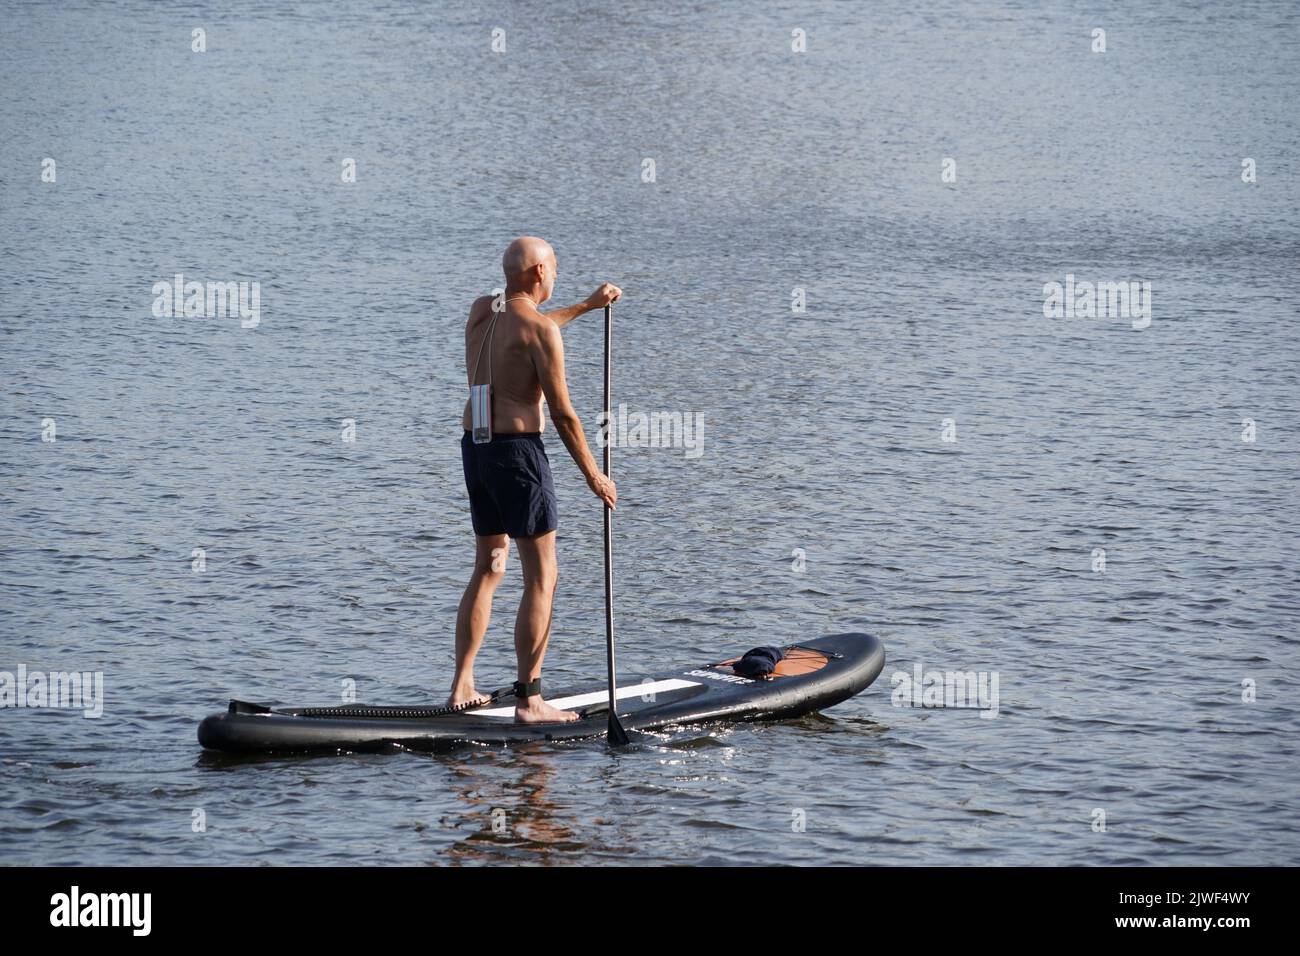 Man standing on a stand up paddle board is paddling on a lake. Stock Photo